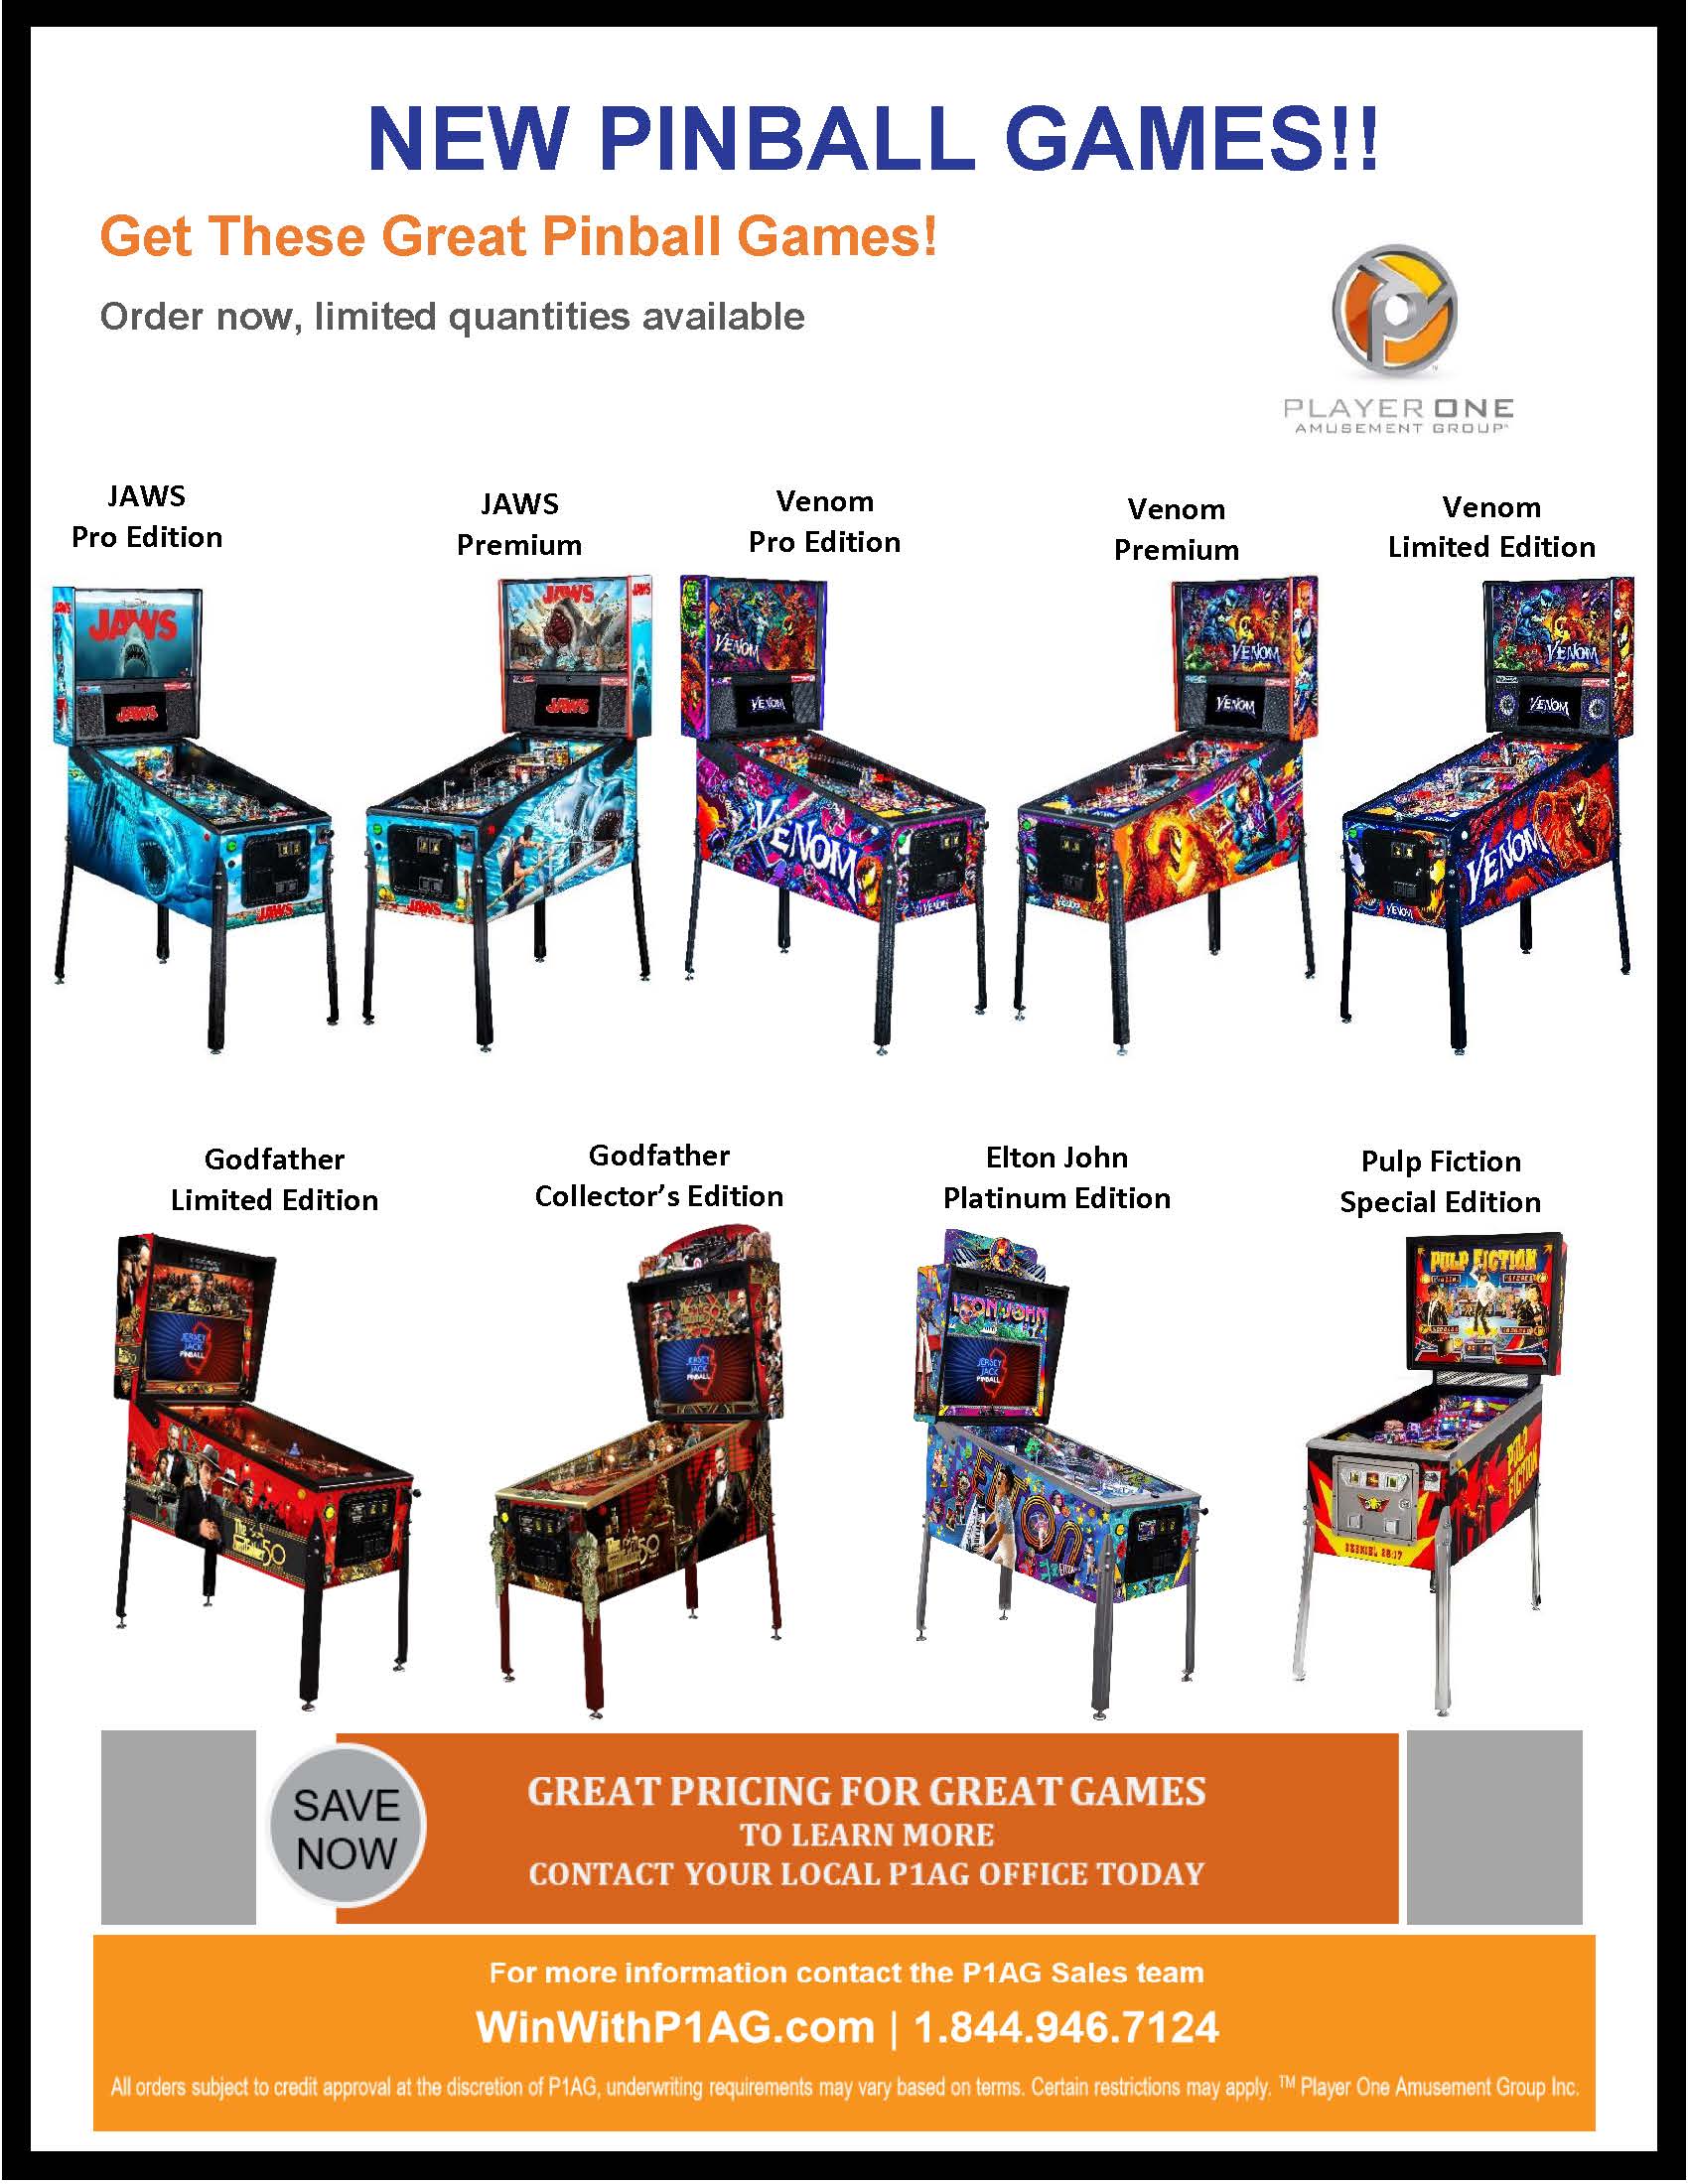 Images of Pinball Games